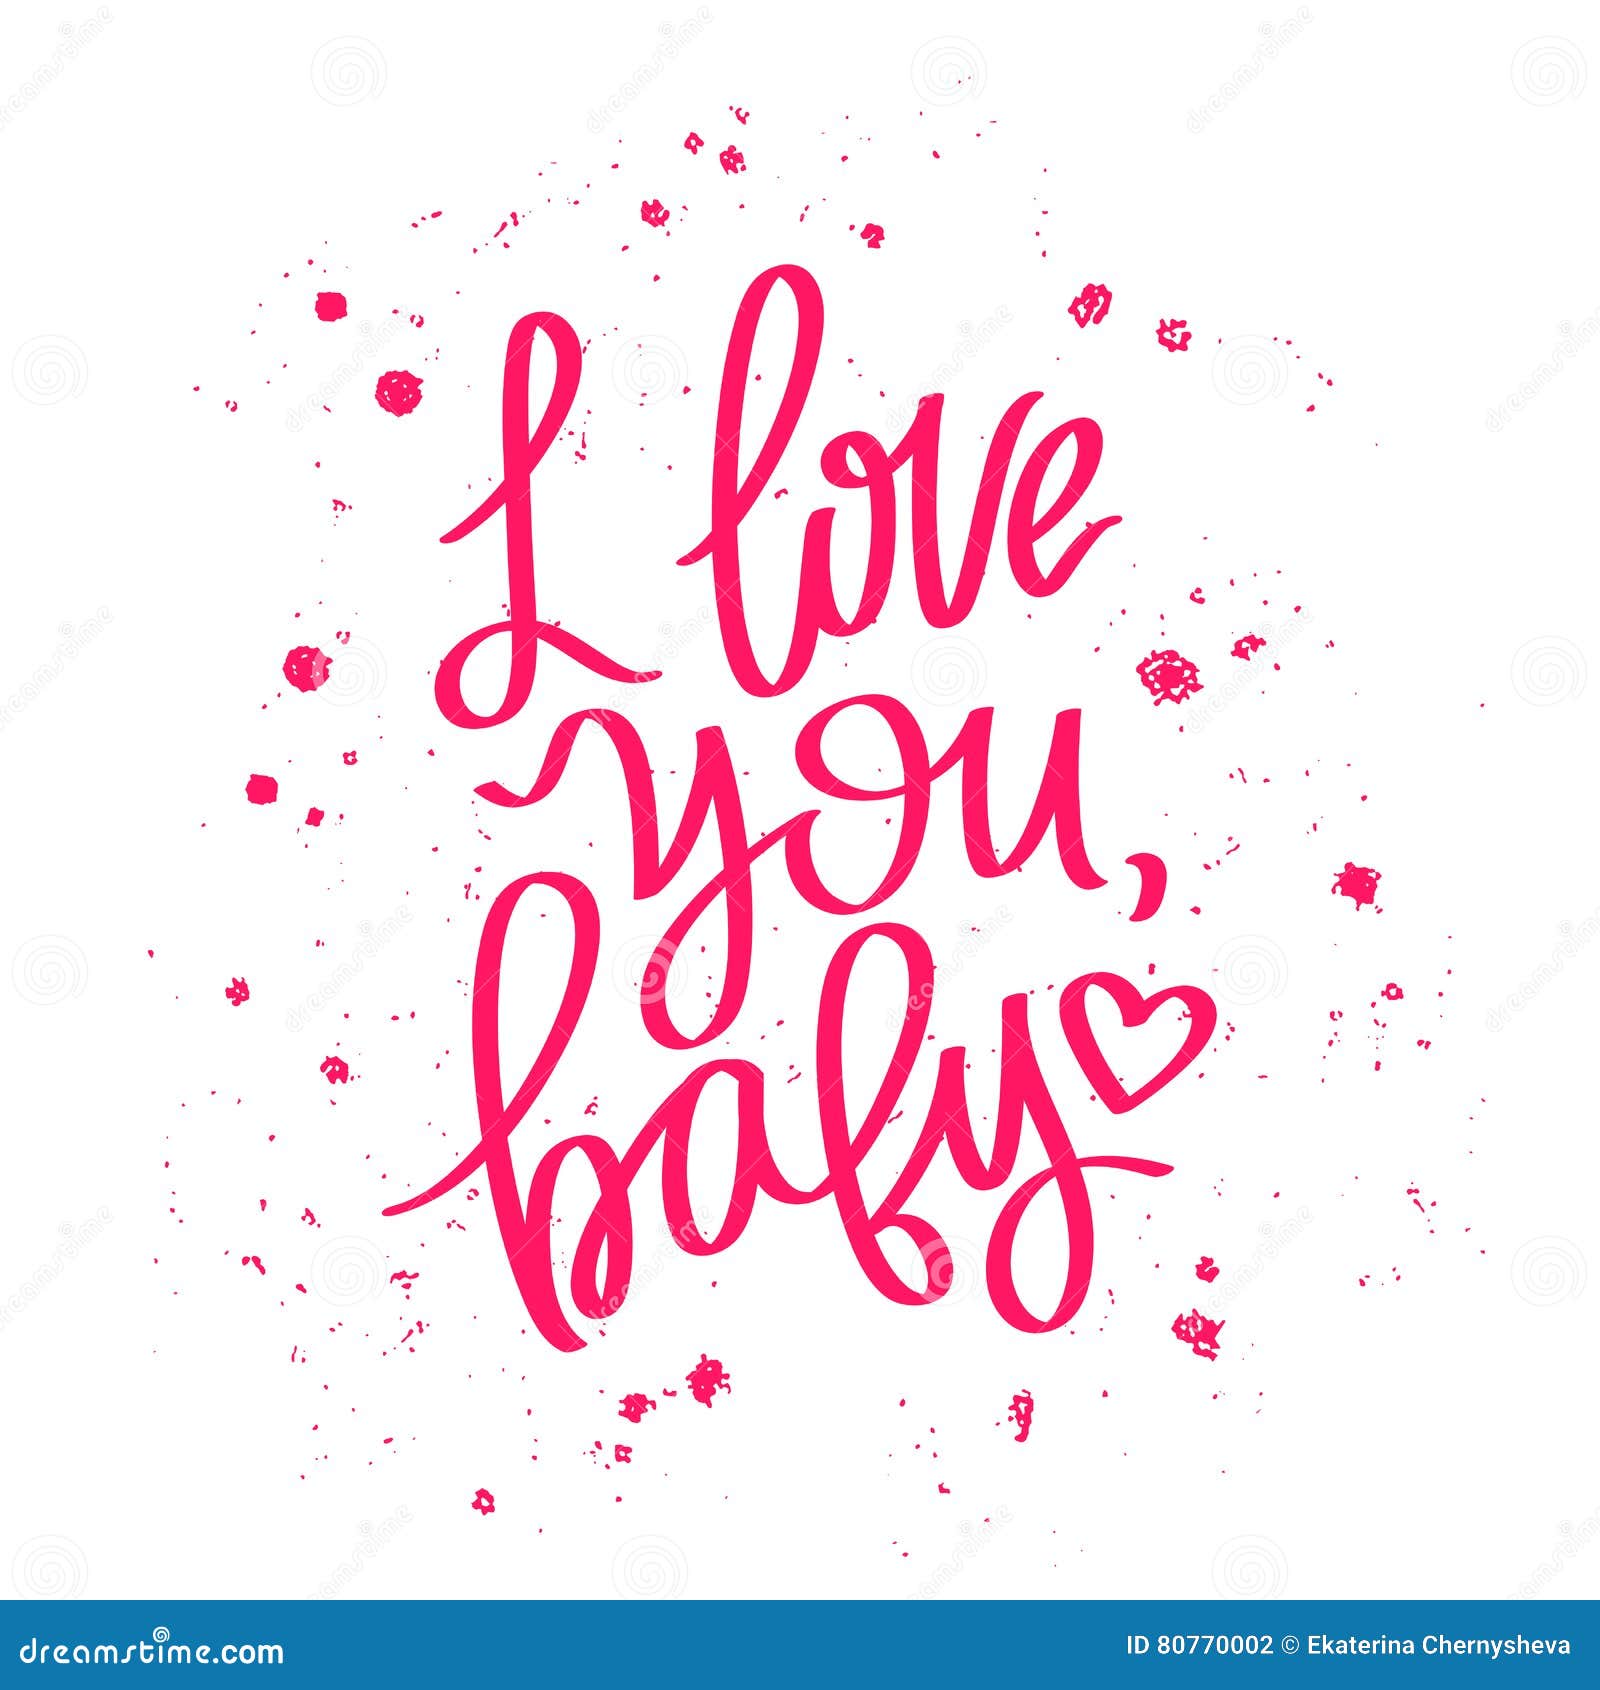 I Love You Baby The Trend Calligraphy Stock Vector Illustration Of Postcard Date